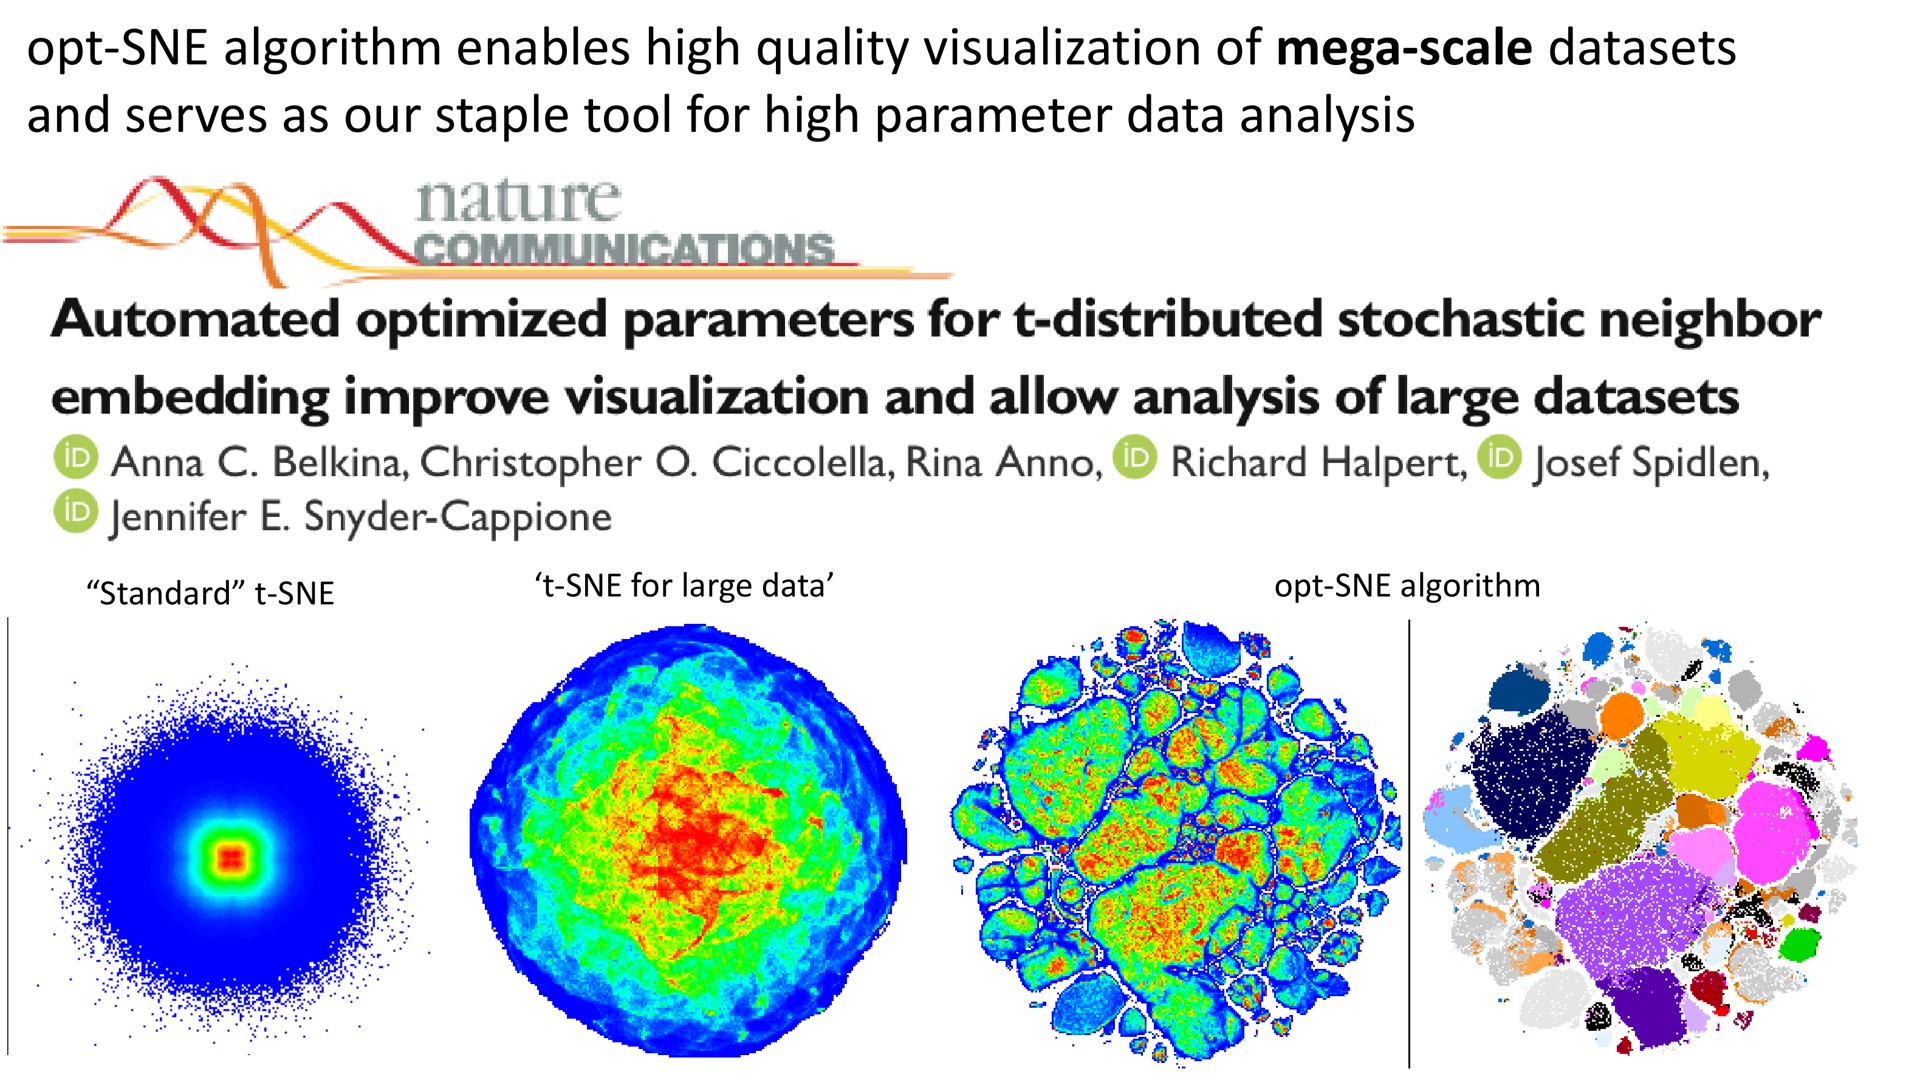 opt algorithm enables high quality visualization of scale and serves as our staple tool for high parameter data analysis so nature optimized parameters distributed stochastic neighbor embedding improve allow large | Cytek